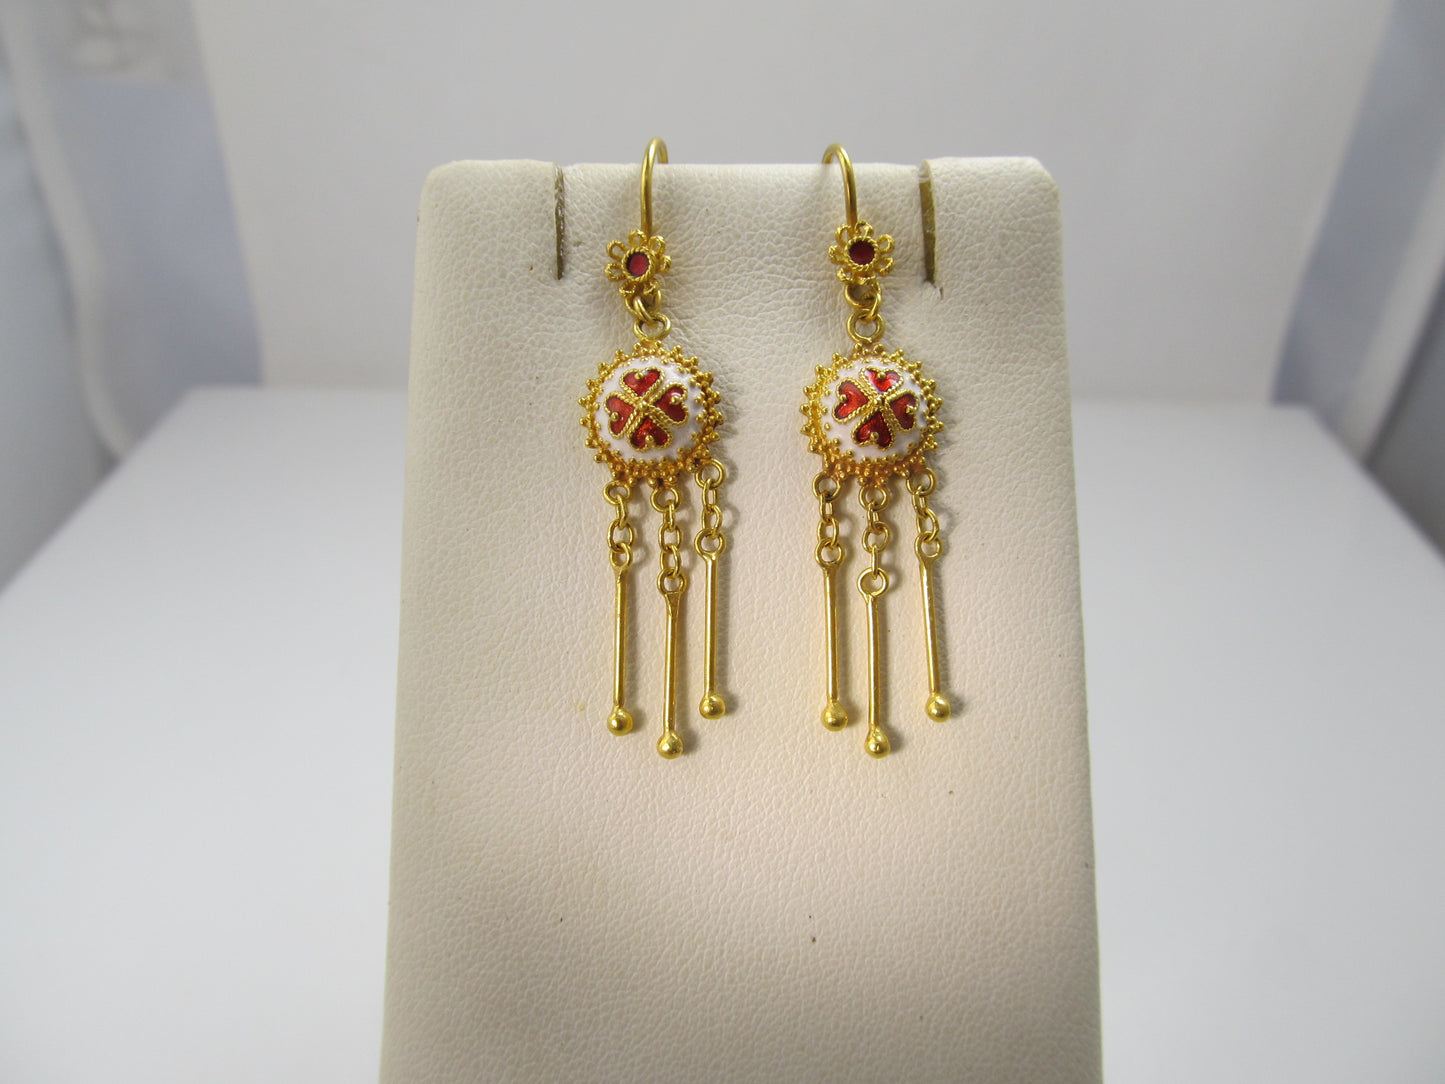 22k gold earrings with red and white enamel